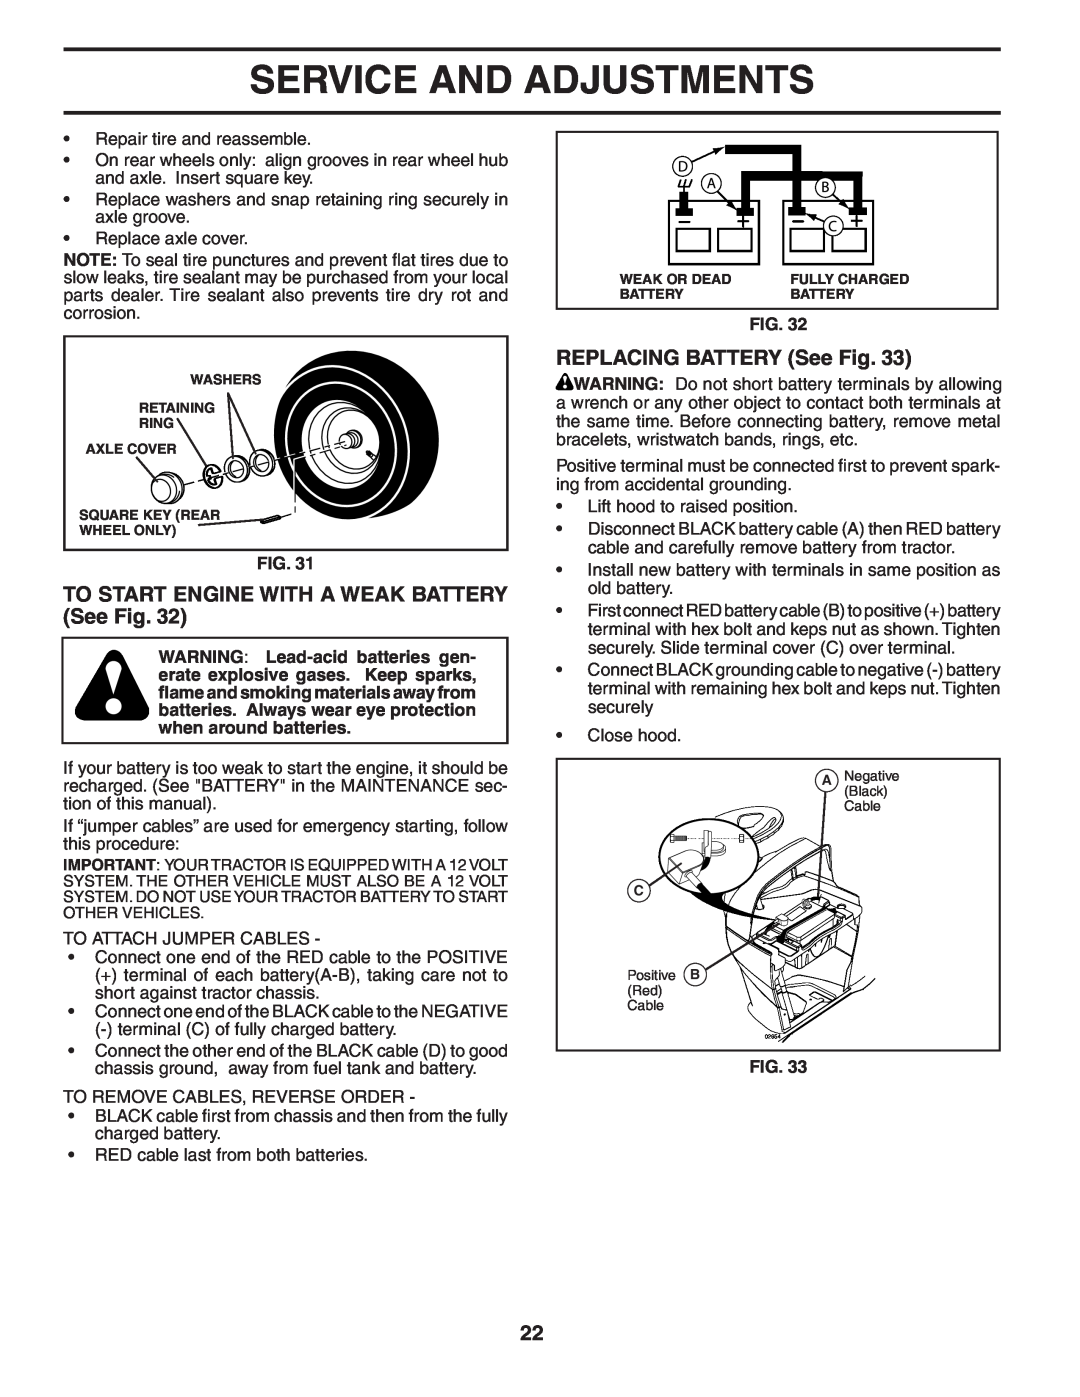 Poulan XT22H48YT manual TO START ENGINE WITH A WEAK BATTERY See Fig, REPLACING BATTERY See Fig, Service And Adjustments 